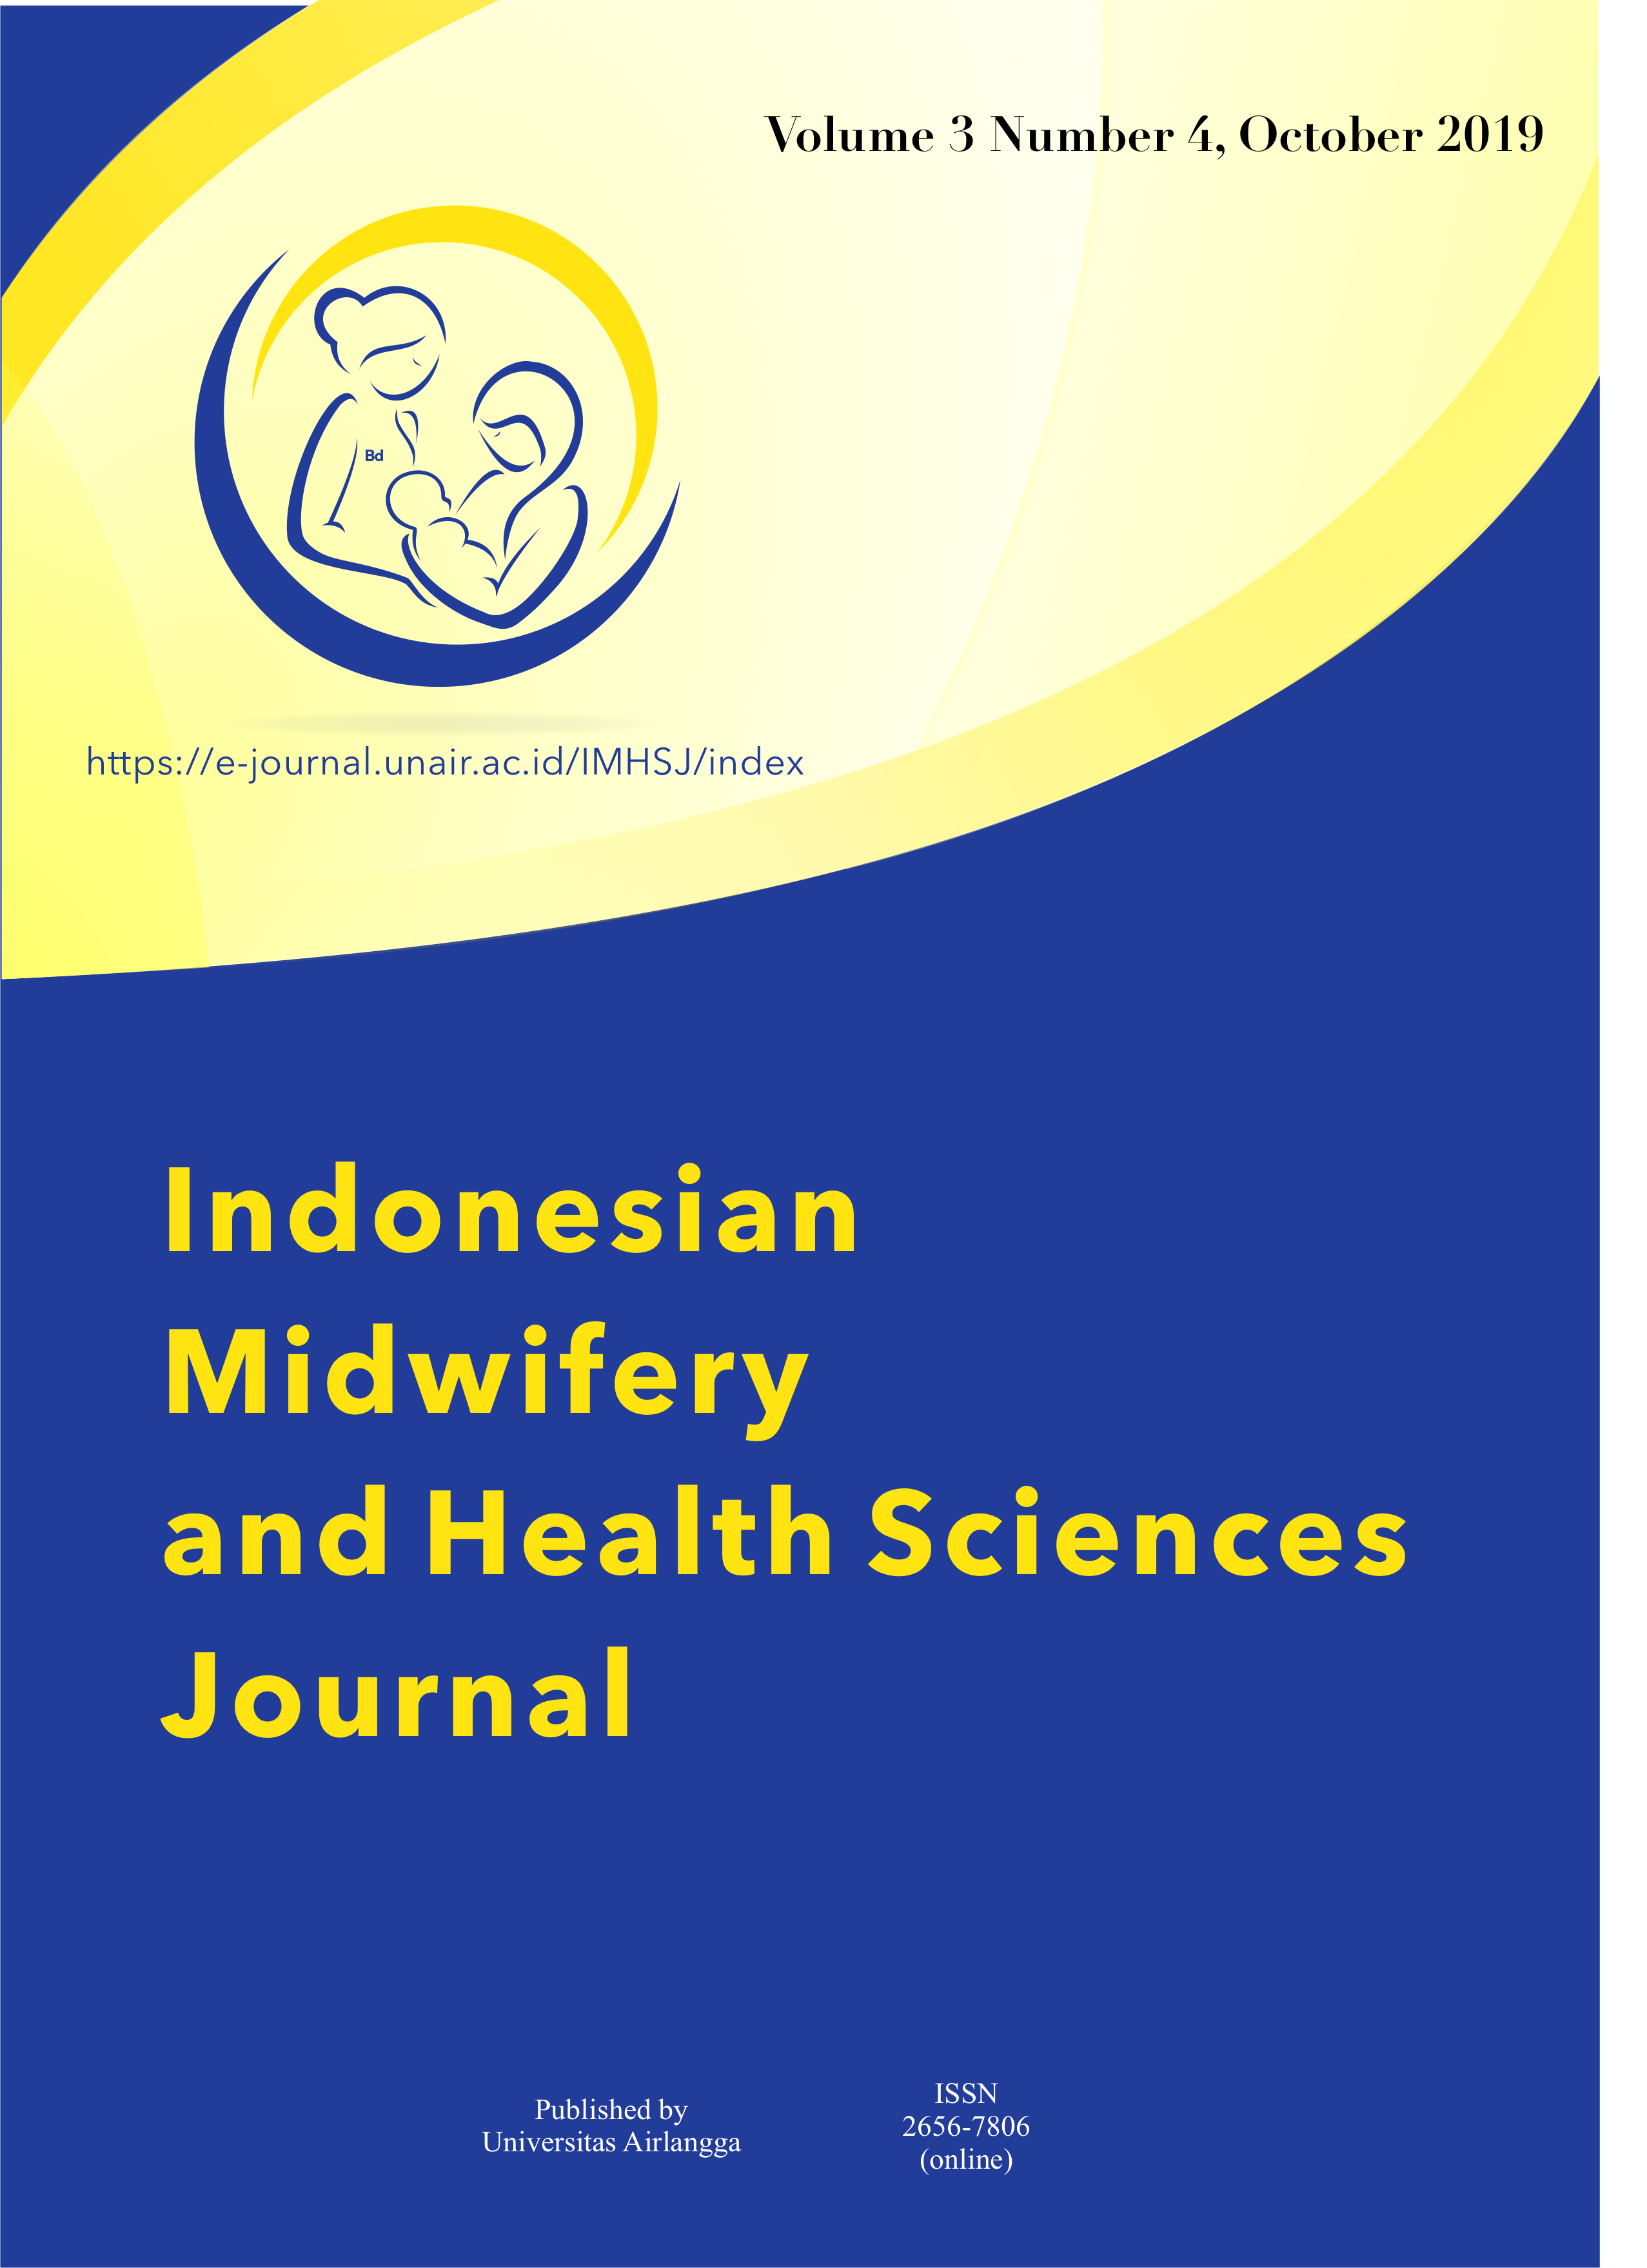 						View Vol. 3 No. 4 (2019): Indonesian Midwifery and Health Sciences Journal, October 2019
					